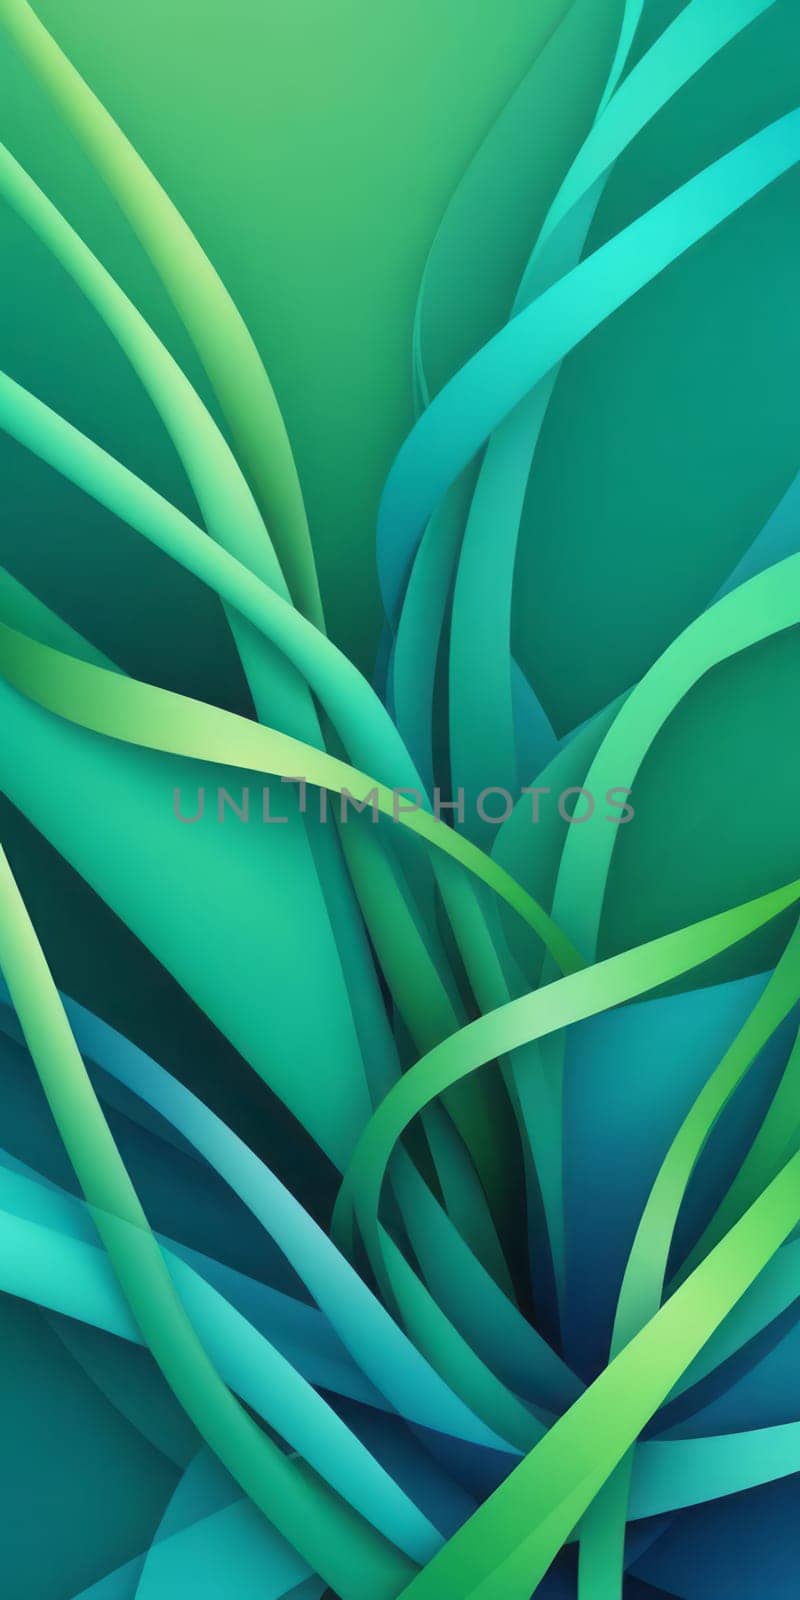 Intertwined Shapes in Green Powderblue by nkotlyar